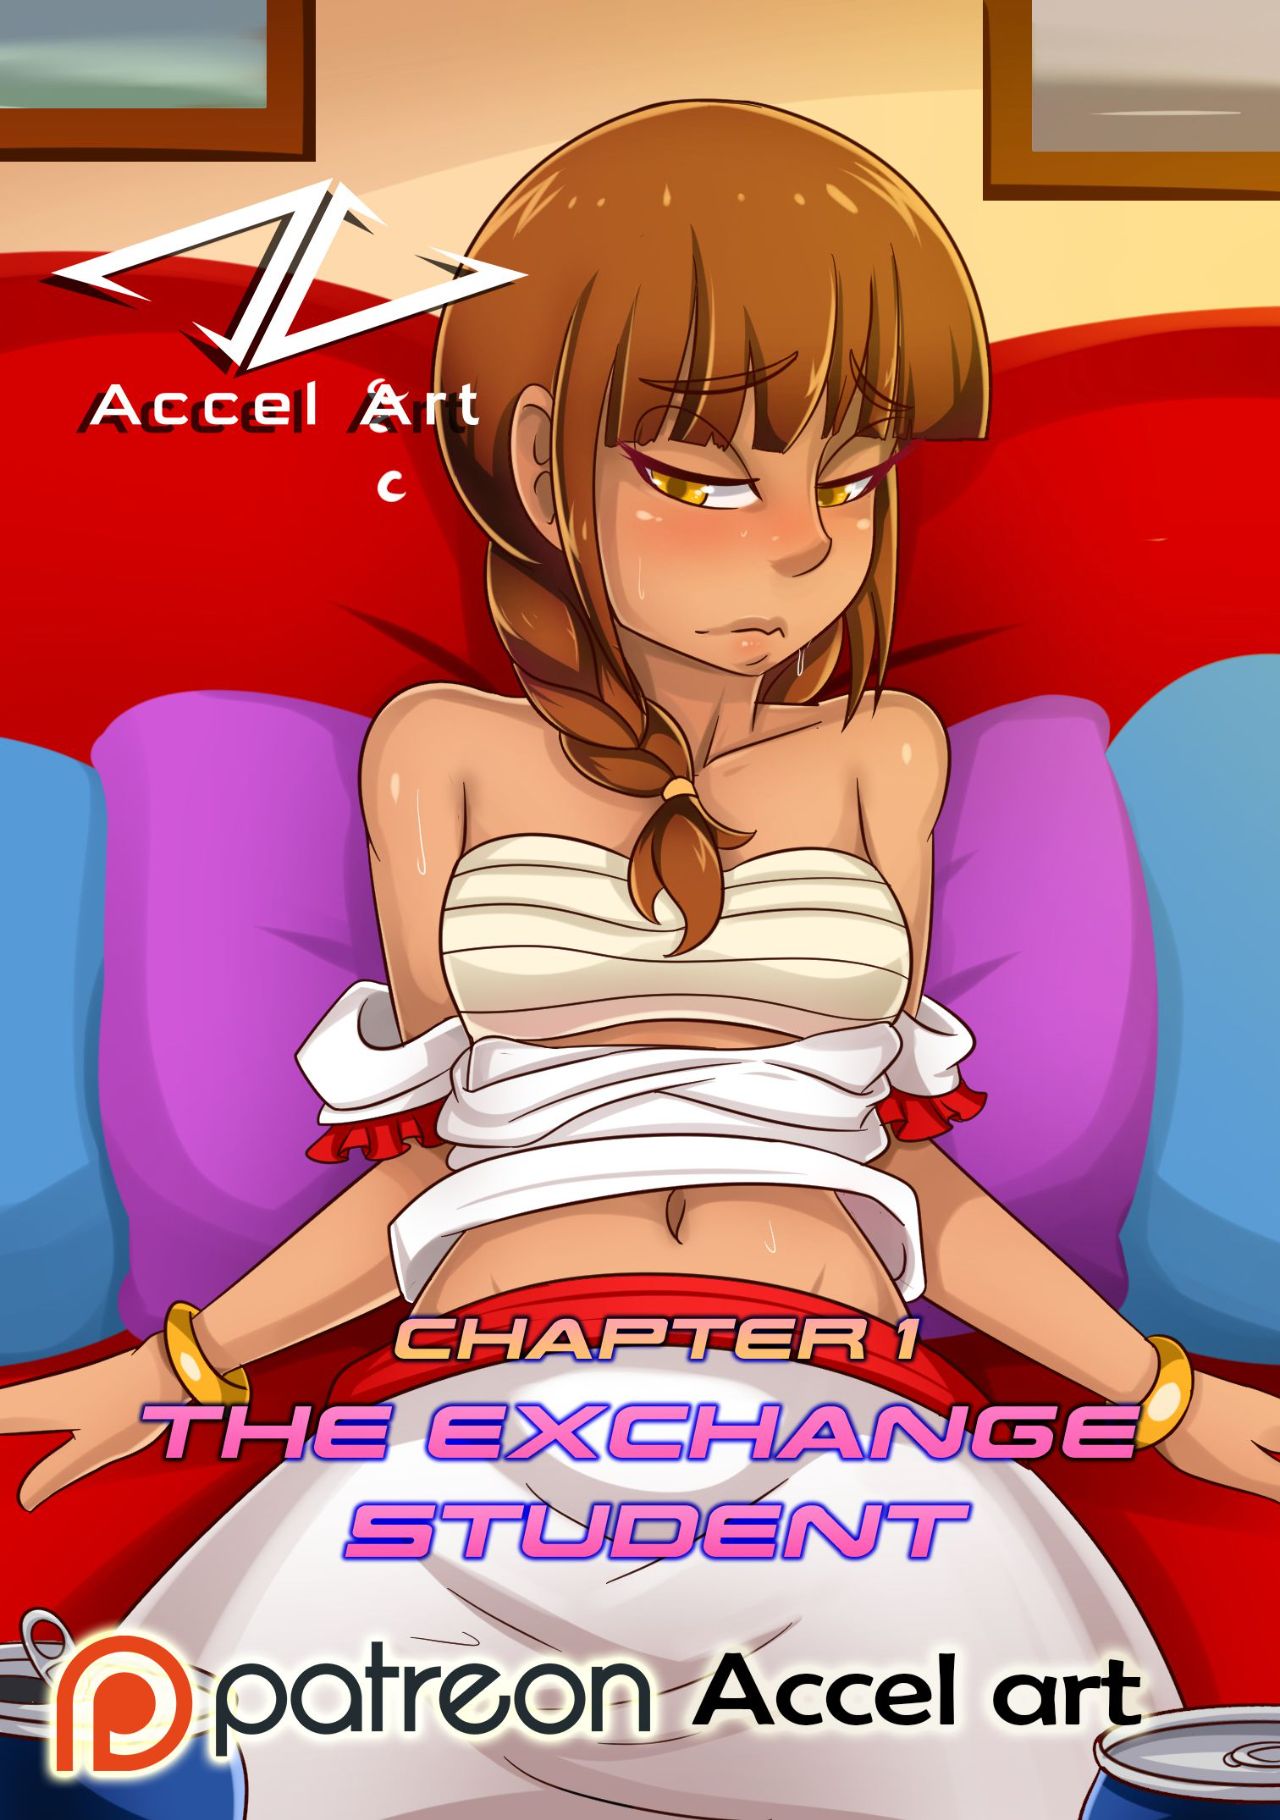 Axi Stories Part 1 - The Exchange Student Hentai pt-br 03